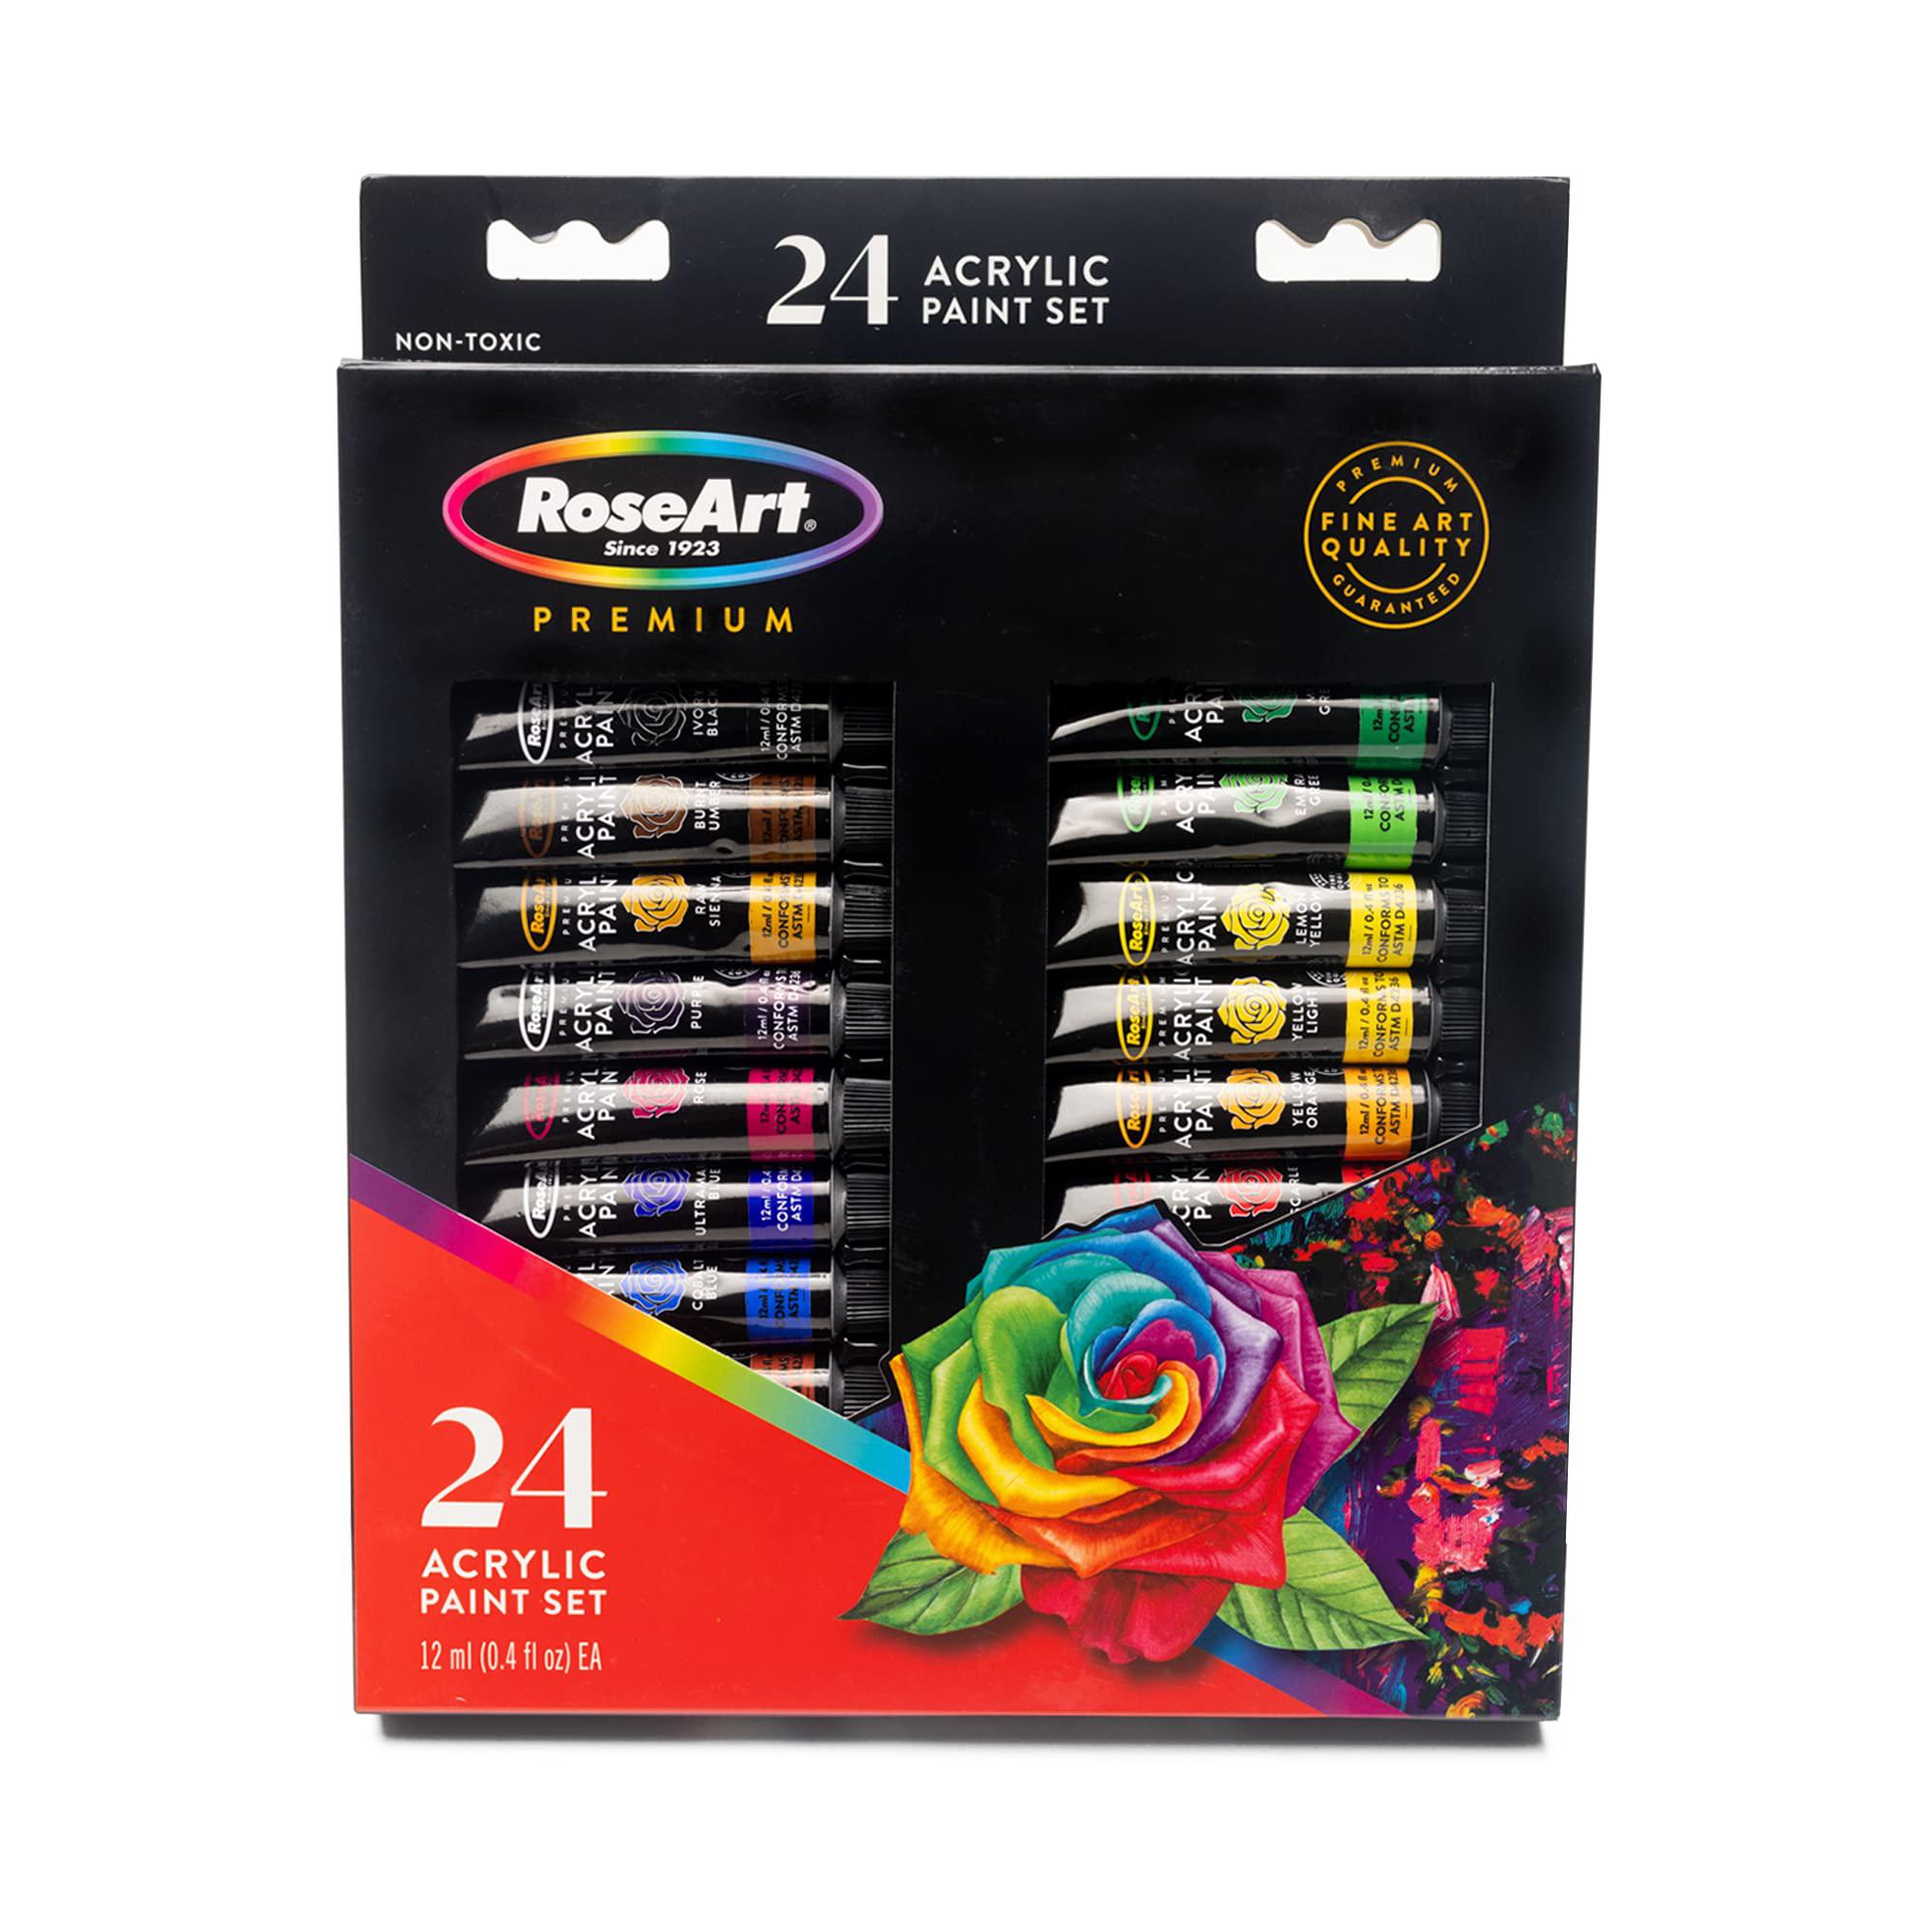 roseart premium paint set - 24 count acrylic paints for canvas, wood, ceramic and fabrics - craft painting supplies for casua